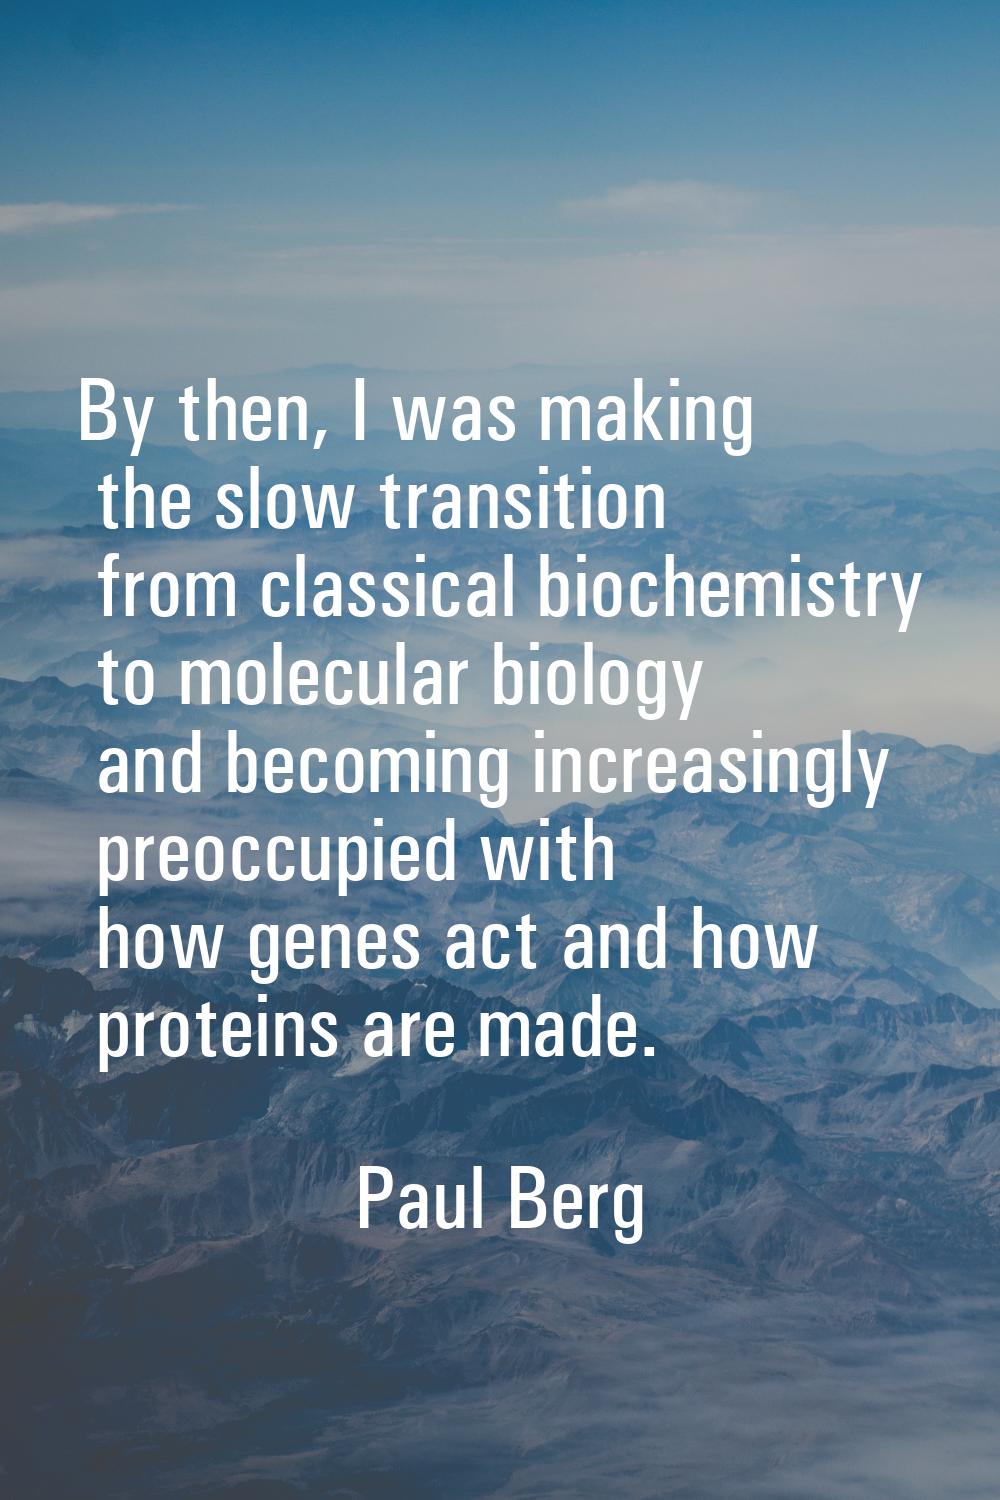 By then, I was making the slow transition from classical biochemistry to molecular biology and beco